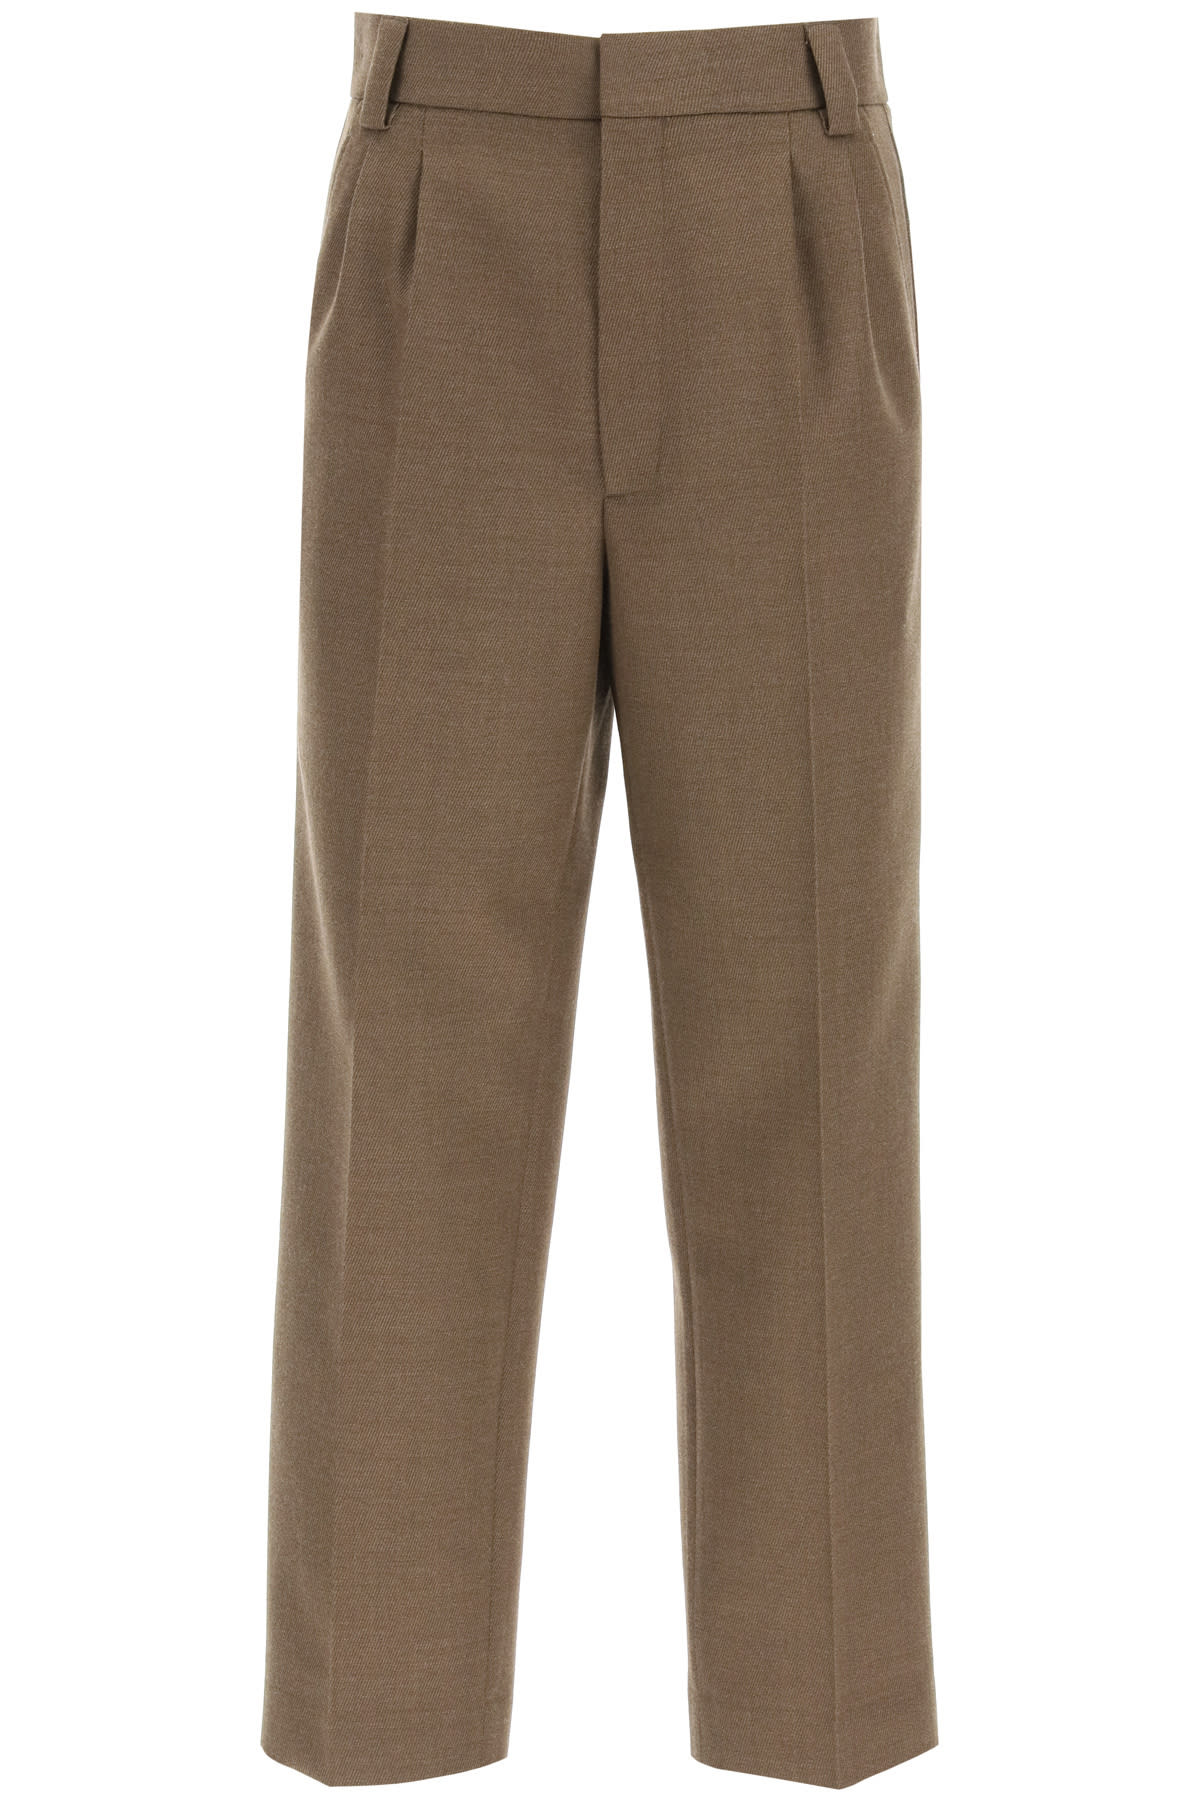 Fear of God Cavalry Twill Formal Trousers